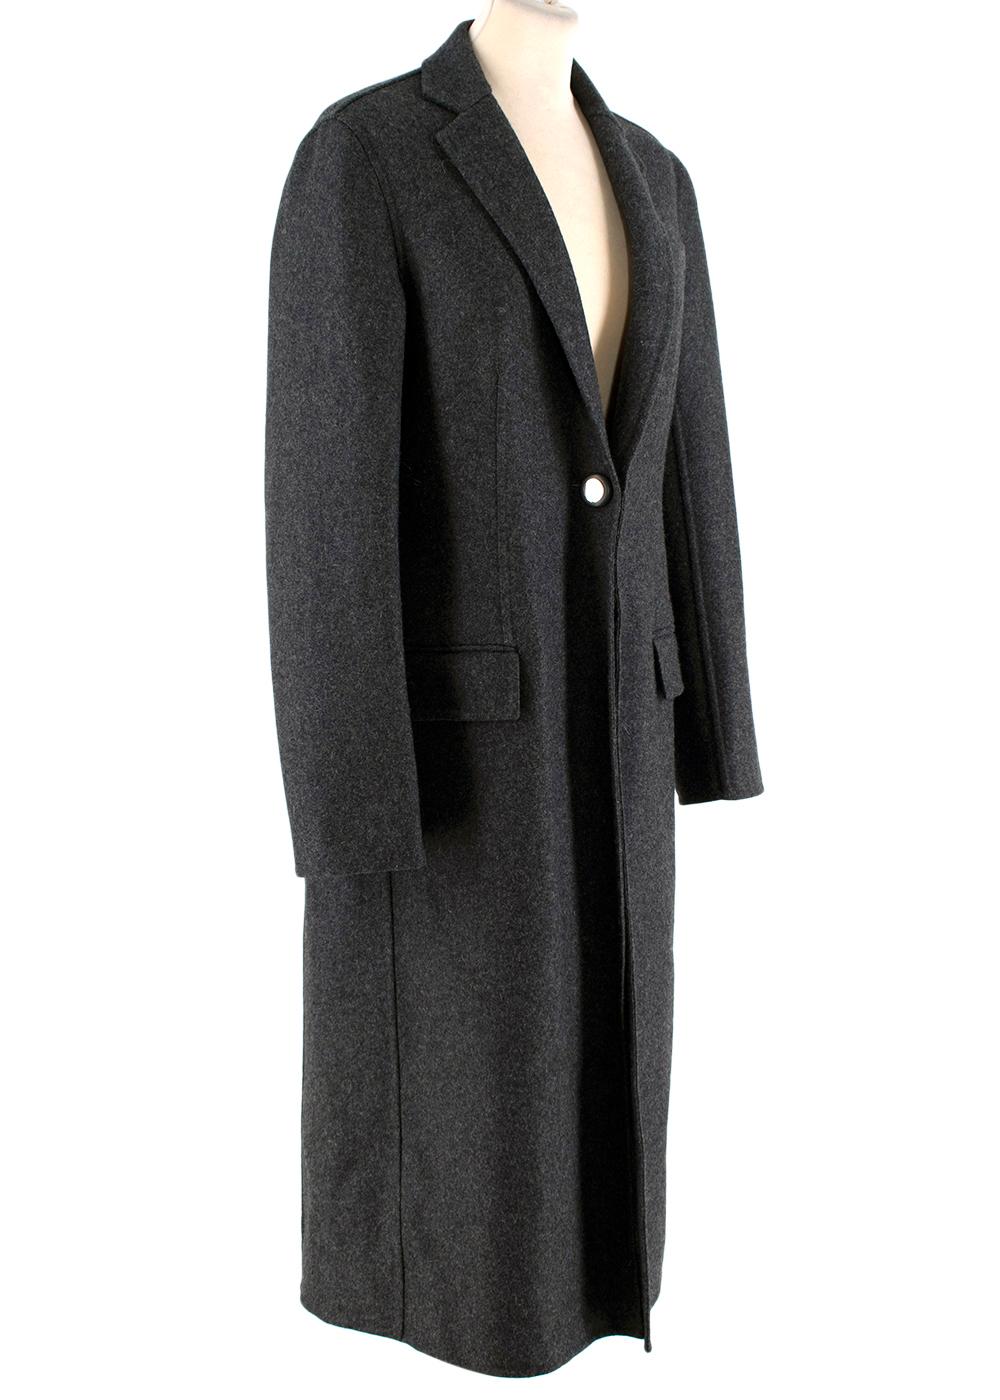 Marni Charcoal Grey Double Faced Wool Blend Felt Coat 

-This double faced wool blend felt loosely tailored coat from Celine features notch lapels, two flap pockets and a chest pocket
- Single bolt-style button closure
-Single vent at the